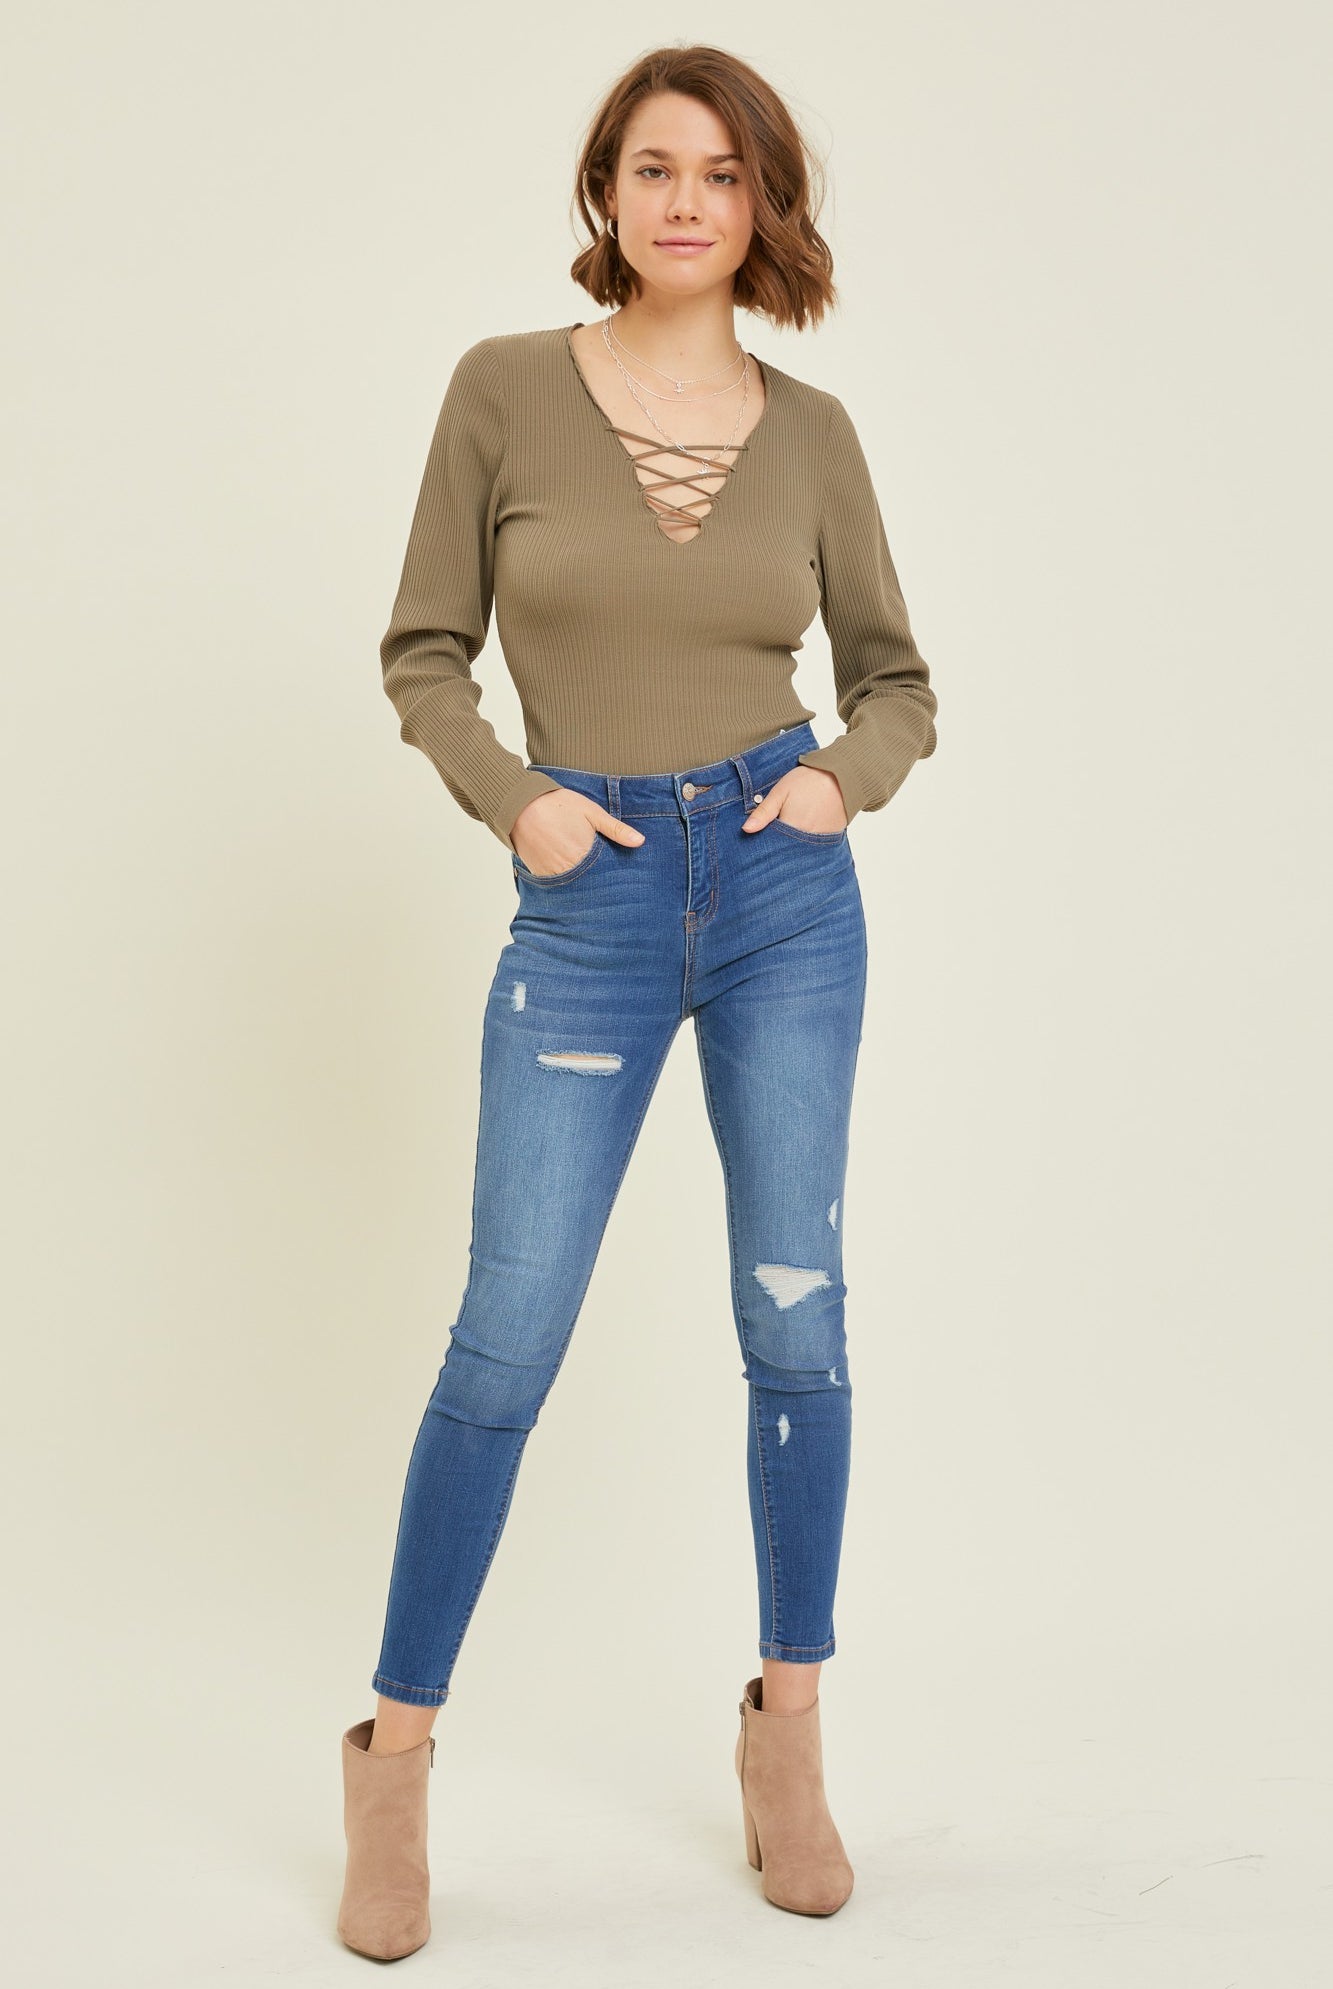 Kayce Ribbed Lace-up Long Sleeve Bodysuit Sweater - Be You Boutique